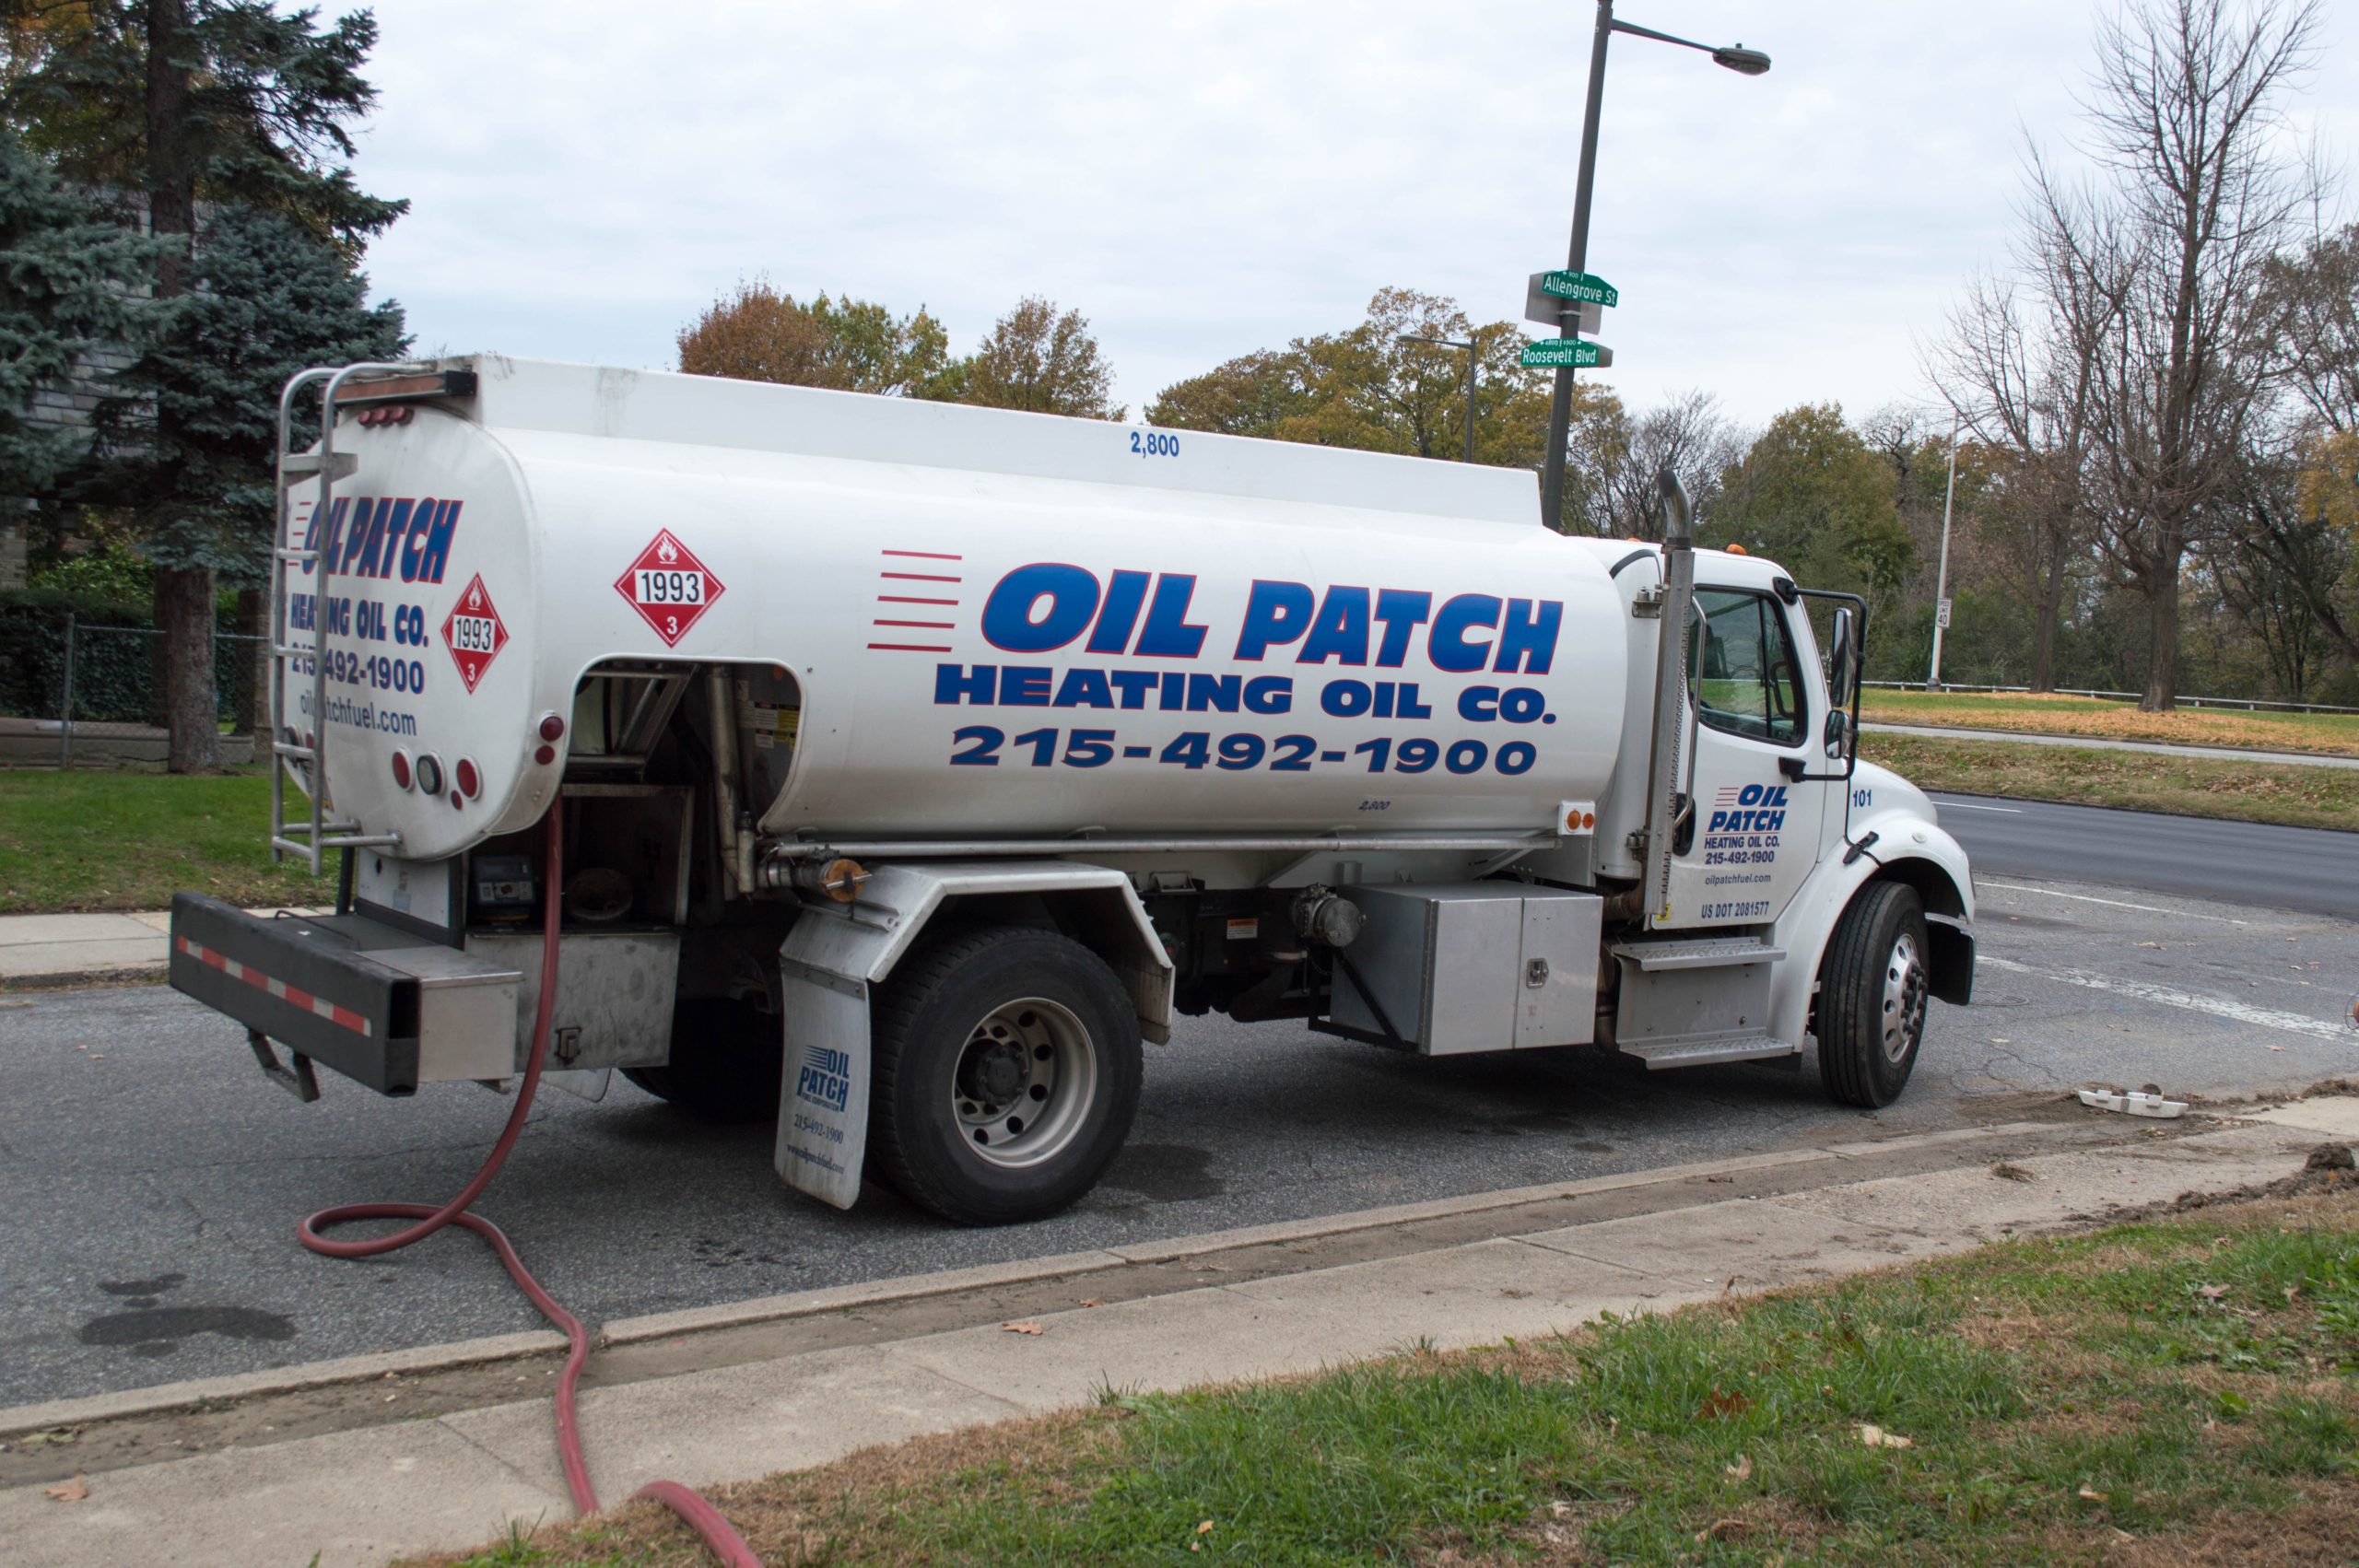 Oil Patch Fuel Home Heating Delivery Truck delivering oil to Philadelphia customer in the Northeast